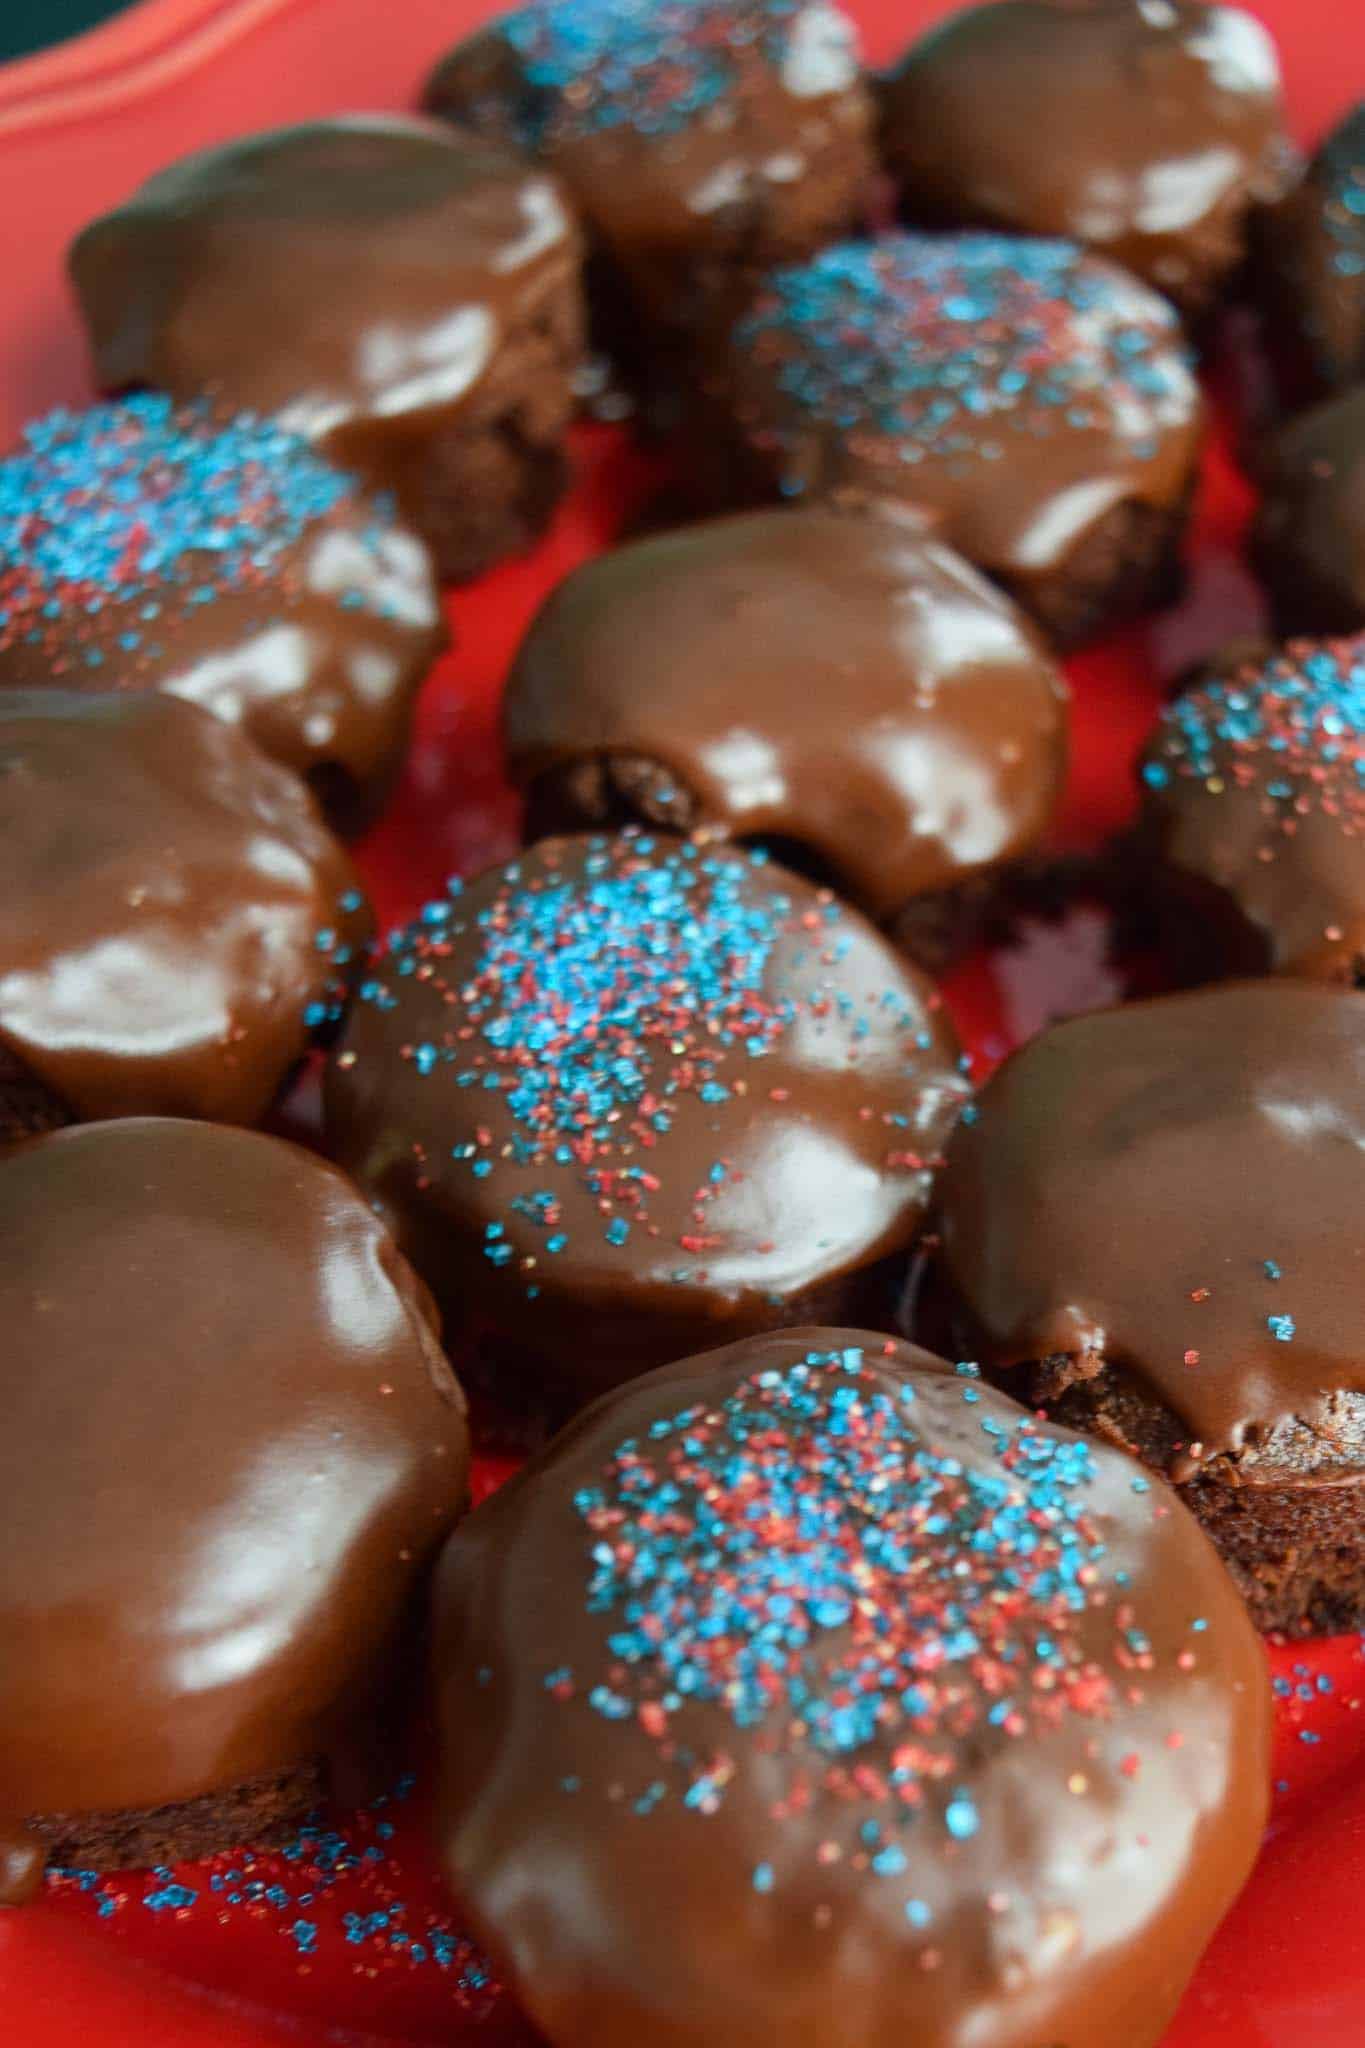 Chocolate Chip Brownie Bites with Homemade Icing topped with red and blue sprinkles close up view